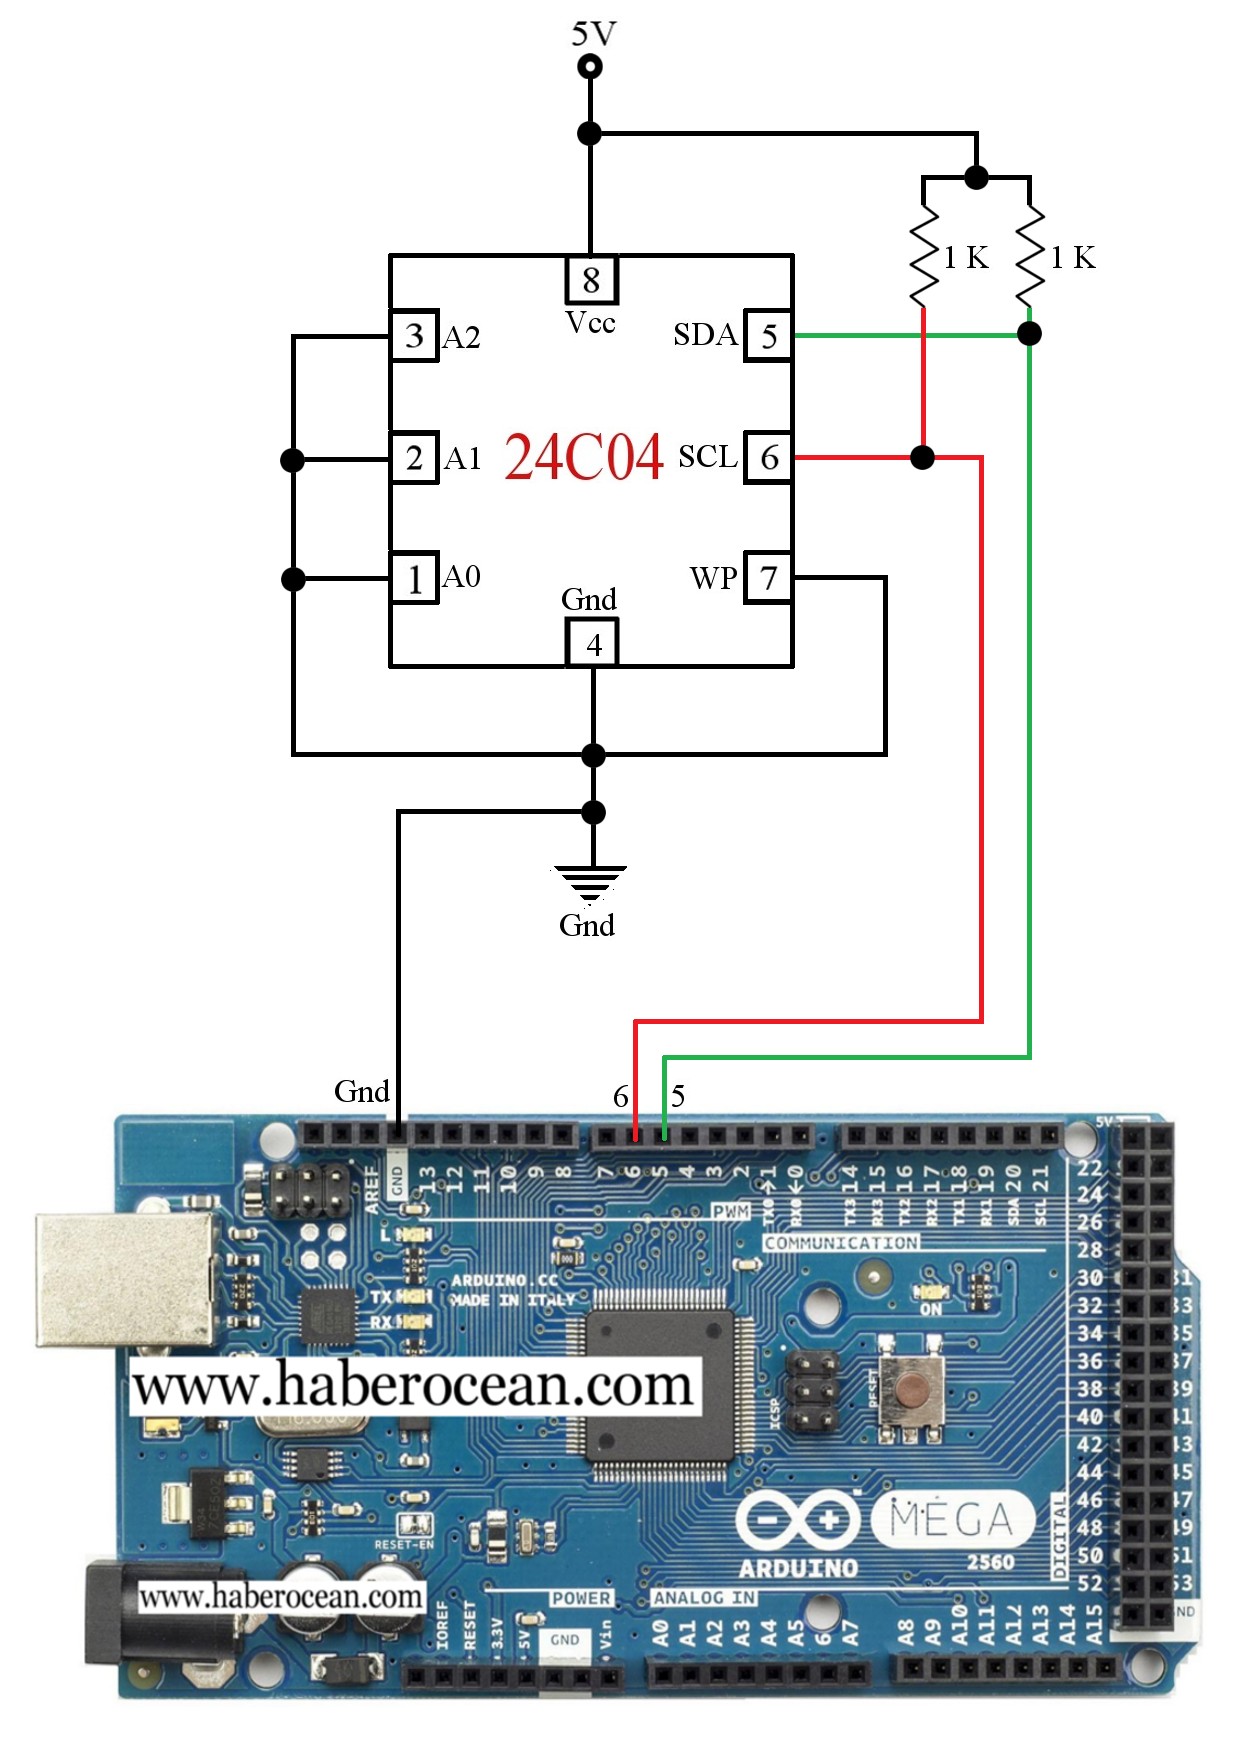 Circuit to Read and Write Data to a 24C04 IC